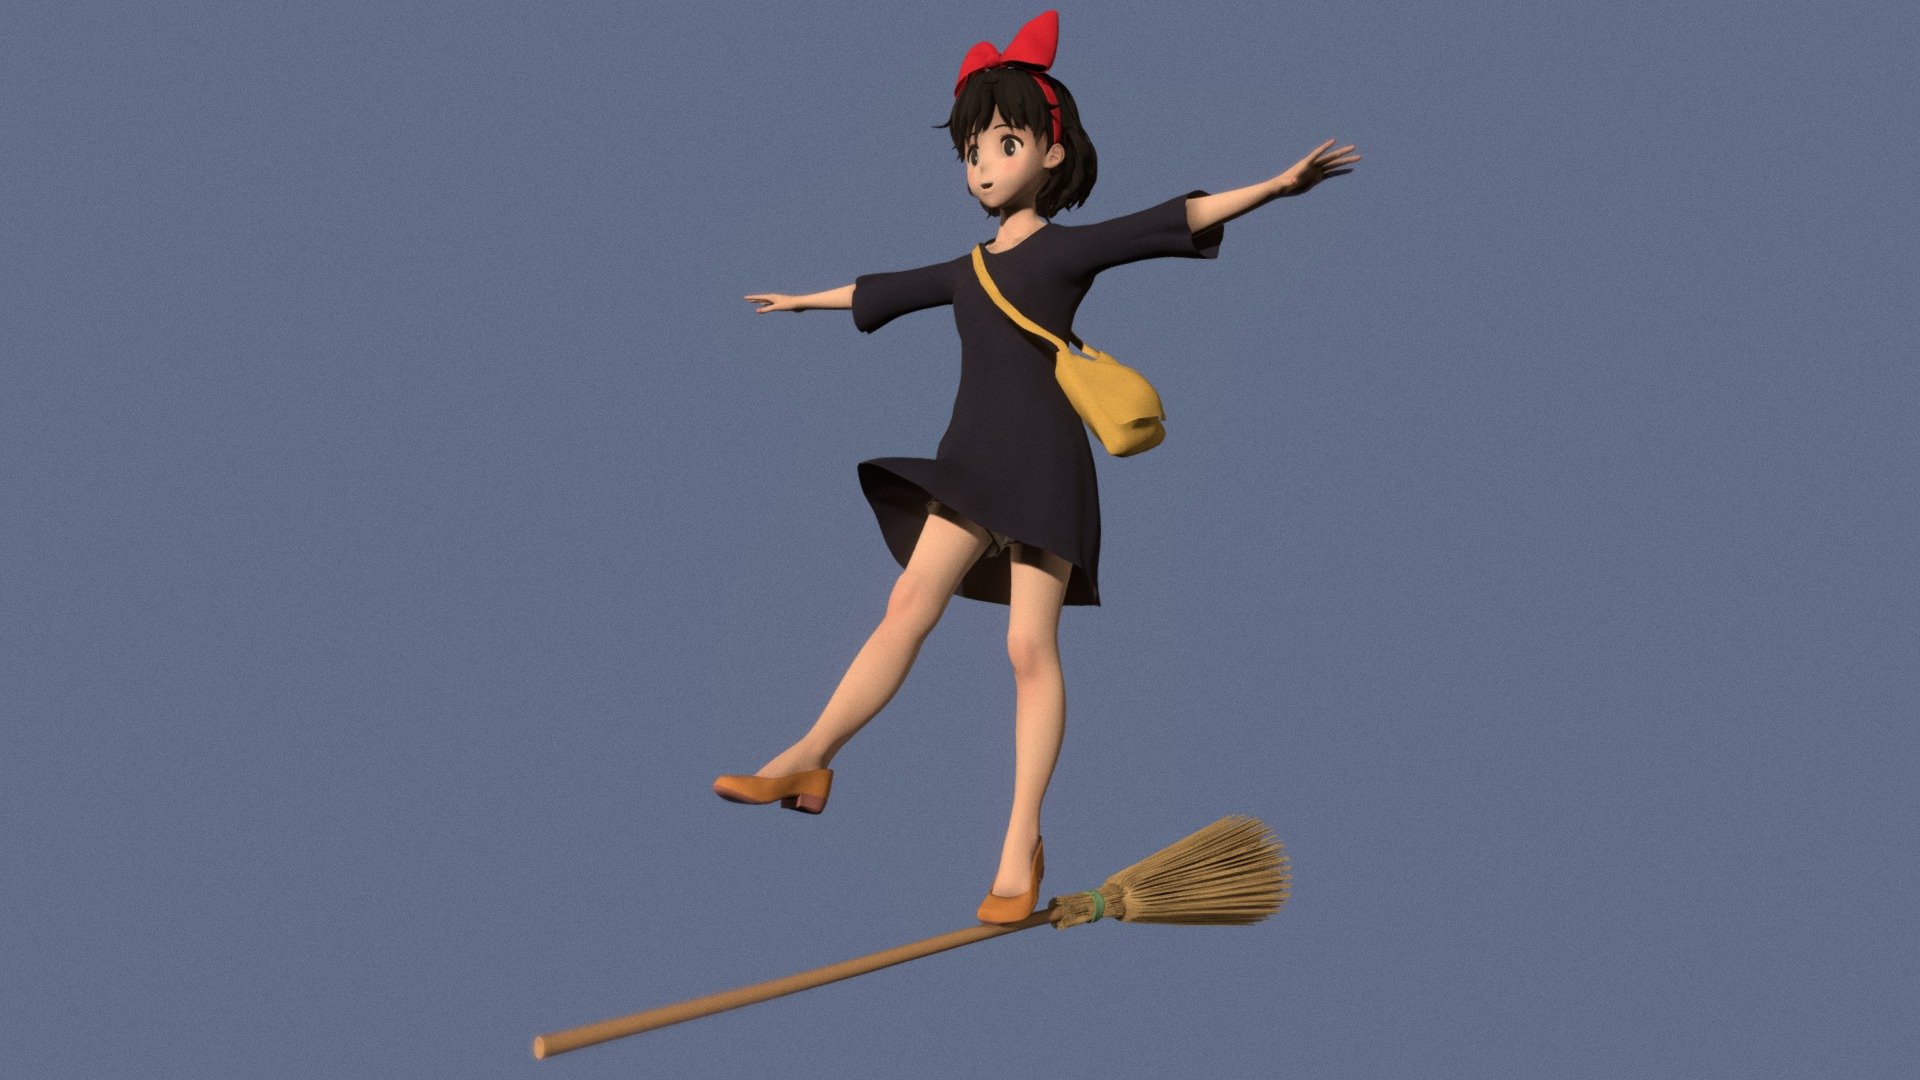 Posed model of anime girl Kiki (Kiki’s Delivery Service).

This product include .FBX (ver. 7200) and .MAX (ver. 2010) files.

Rigged version: https://sketchfab.com/3d-models/t-pose-rigged-model-of-kiki-1aef735955f647c986d33a71c443fe93

I support convert this 3D model to various file formats: 3DS; AI; ASE; DAE; DWF; DWG; DXF; FLT; HTR; IGS; M3G; MQO; OBJ; SAT; STL; W3D; WRL; X.

You can buy all of my models in one pack to save cost: https://sketchfab.com/3d-models/all-of-my-anime-girls-c5a56156994e4193b9e8fa21a3b8360b

And I can make commission models.

If you have any questions, please leave a comment or contact me via my email 3d.eden.project@gmail.com 3d model